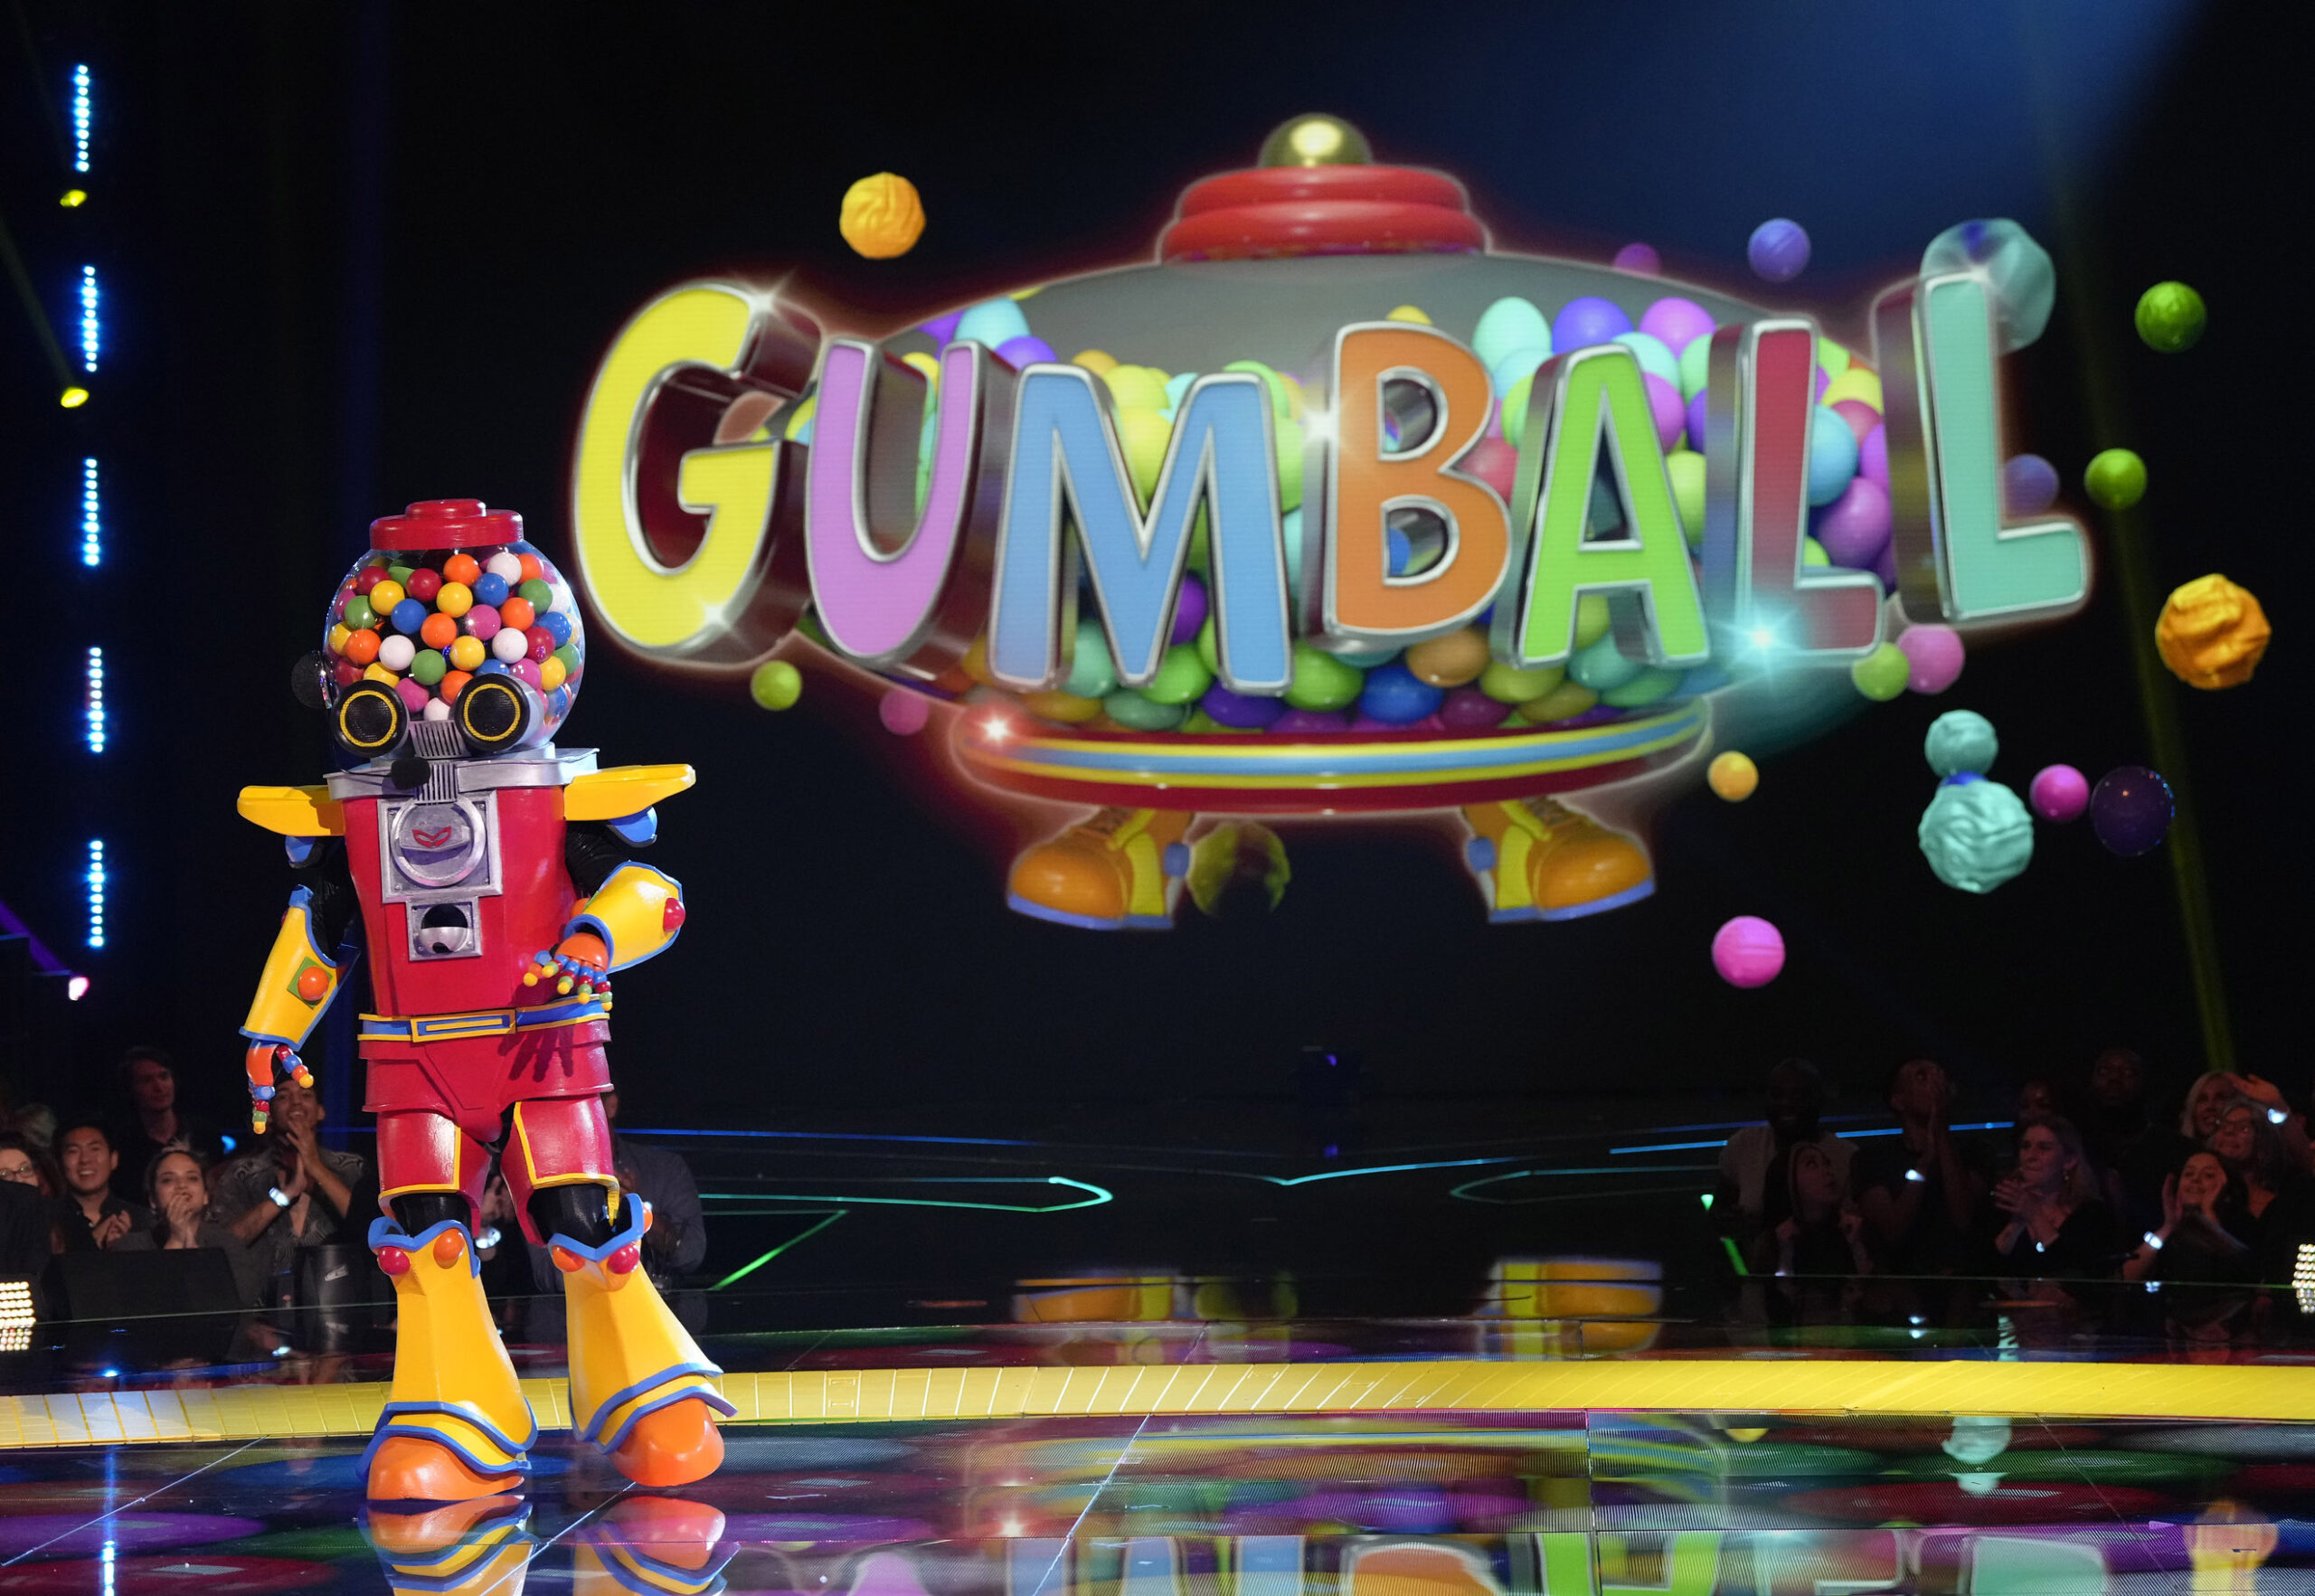 Who Is Gumball on The Masked Singer 11? Kelly Clarkson Cover!